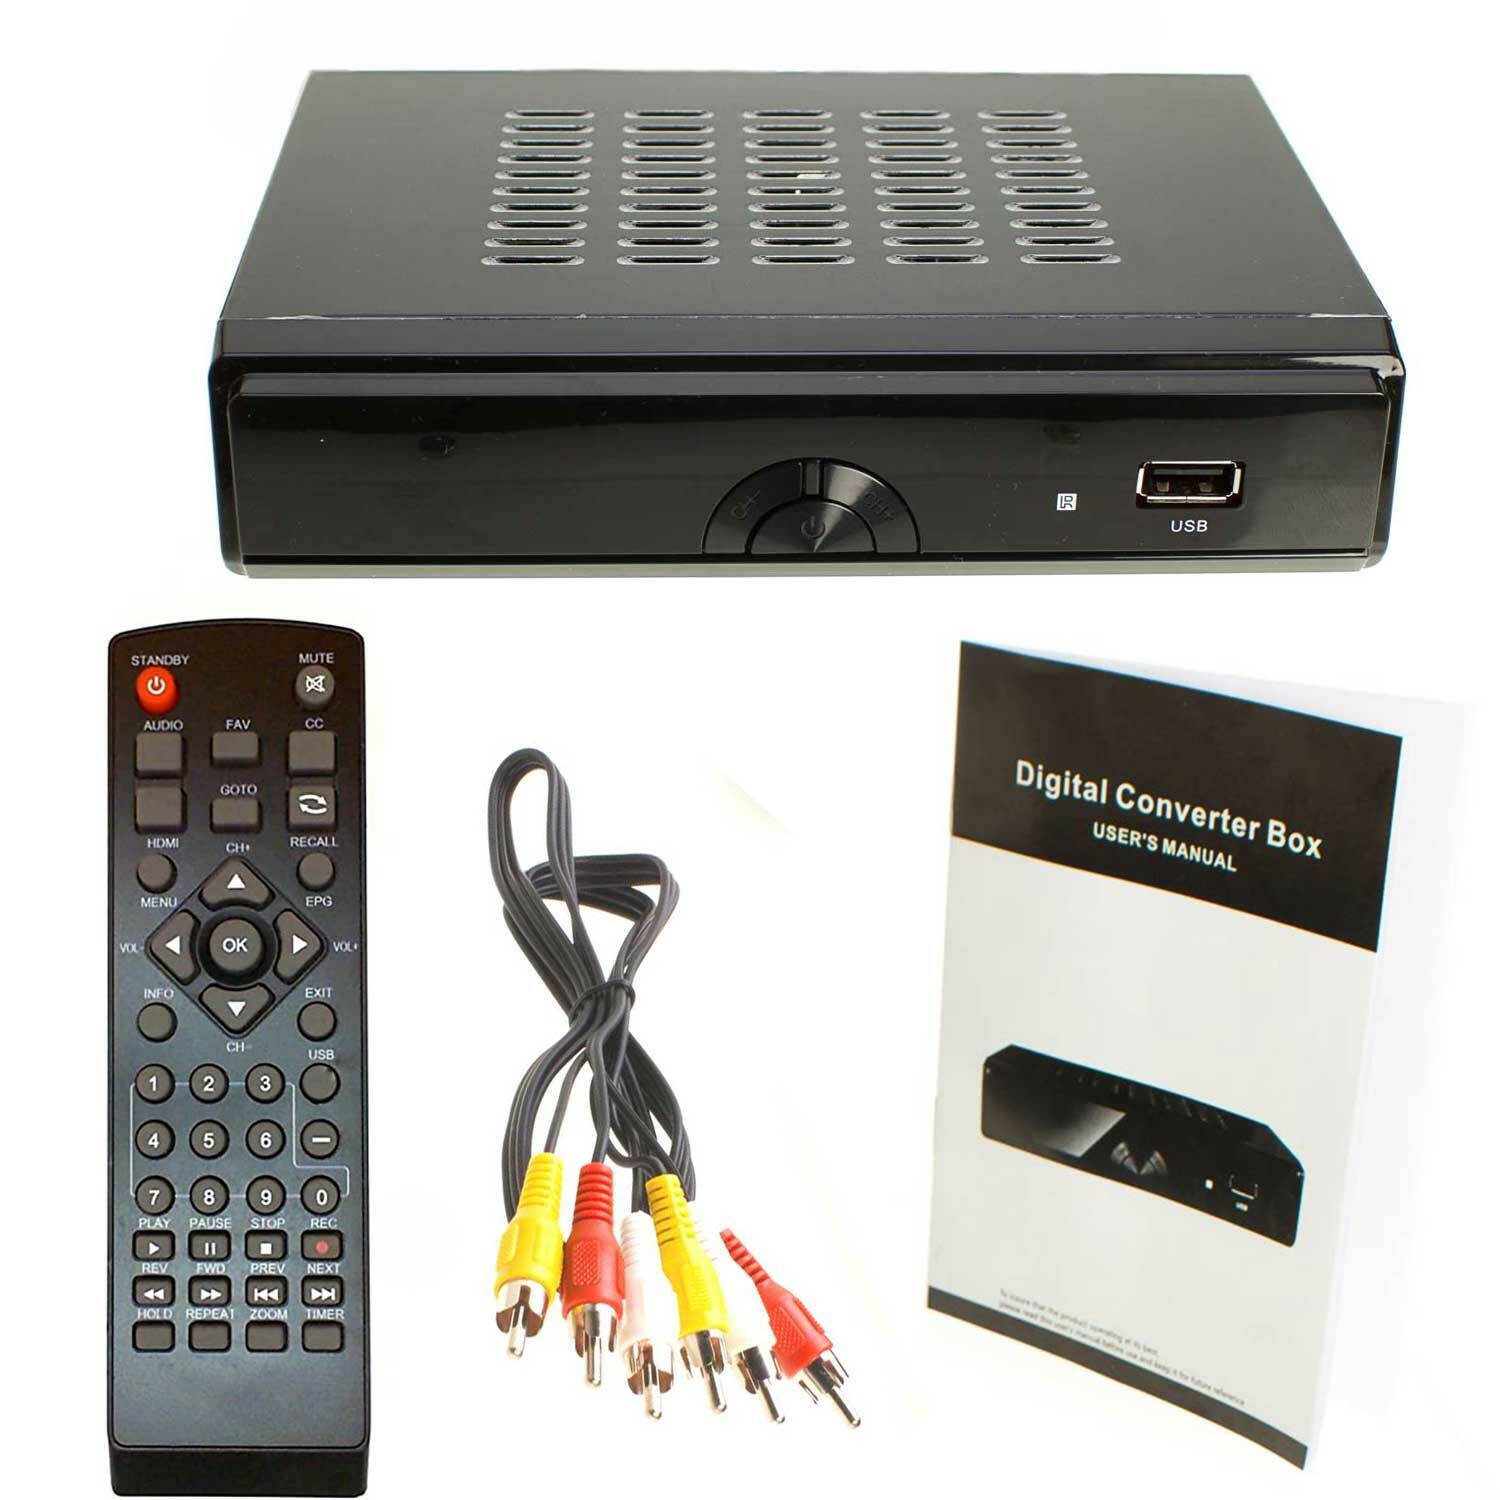 HDTV Digital Converter Box for TV HDMI Cable with Remote View/Record Local PVR